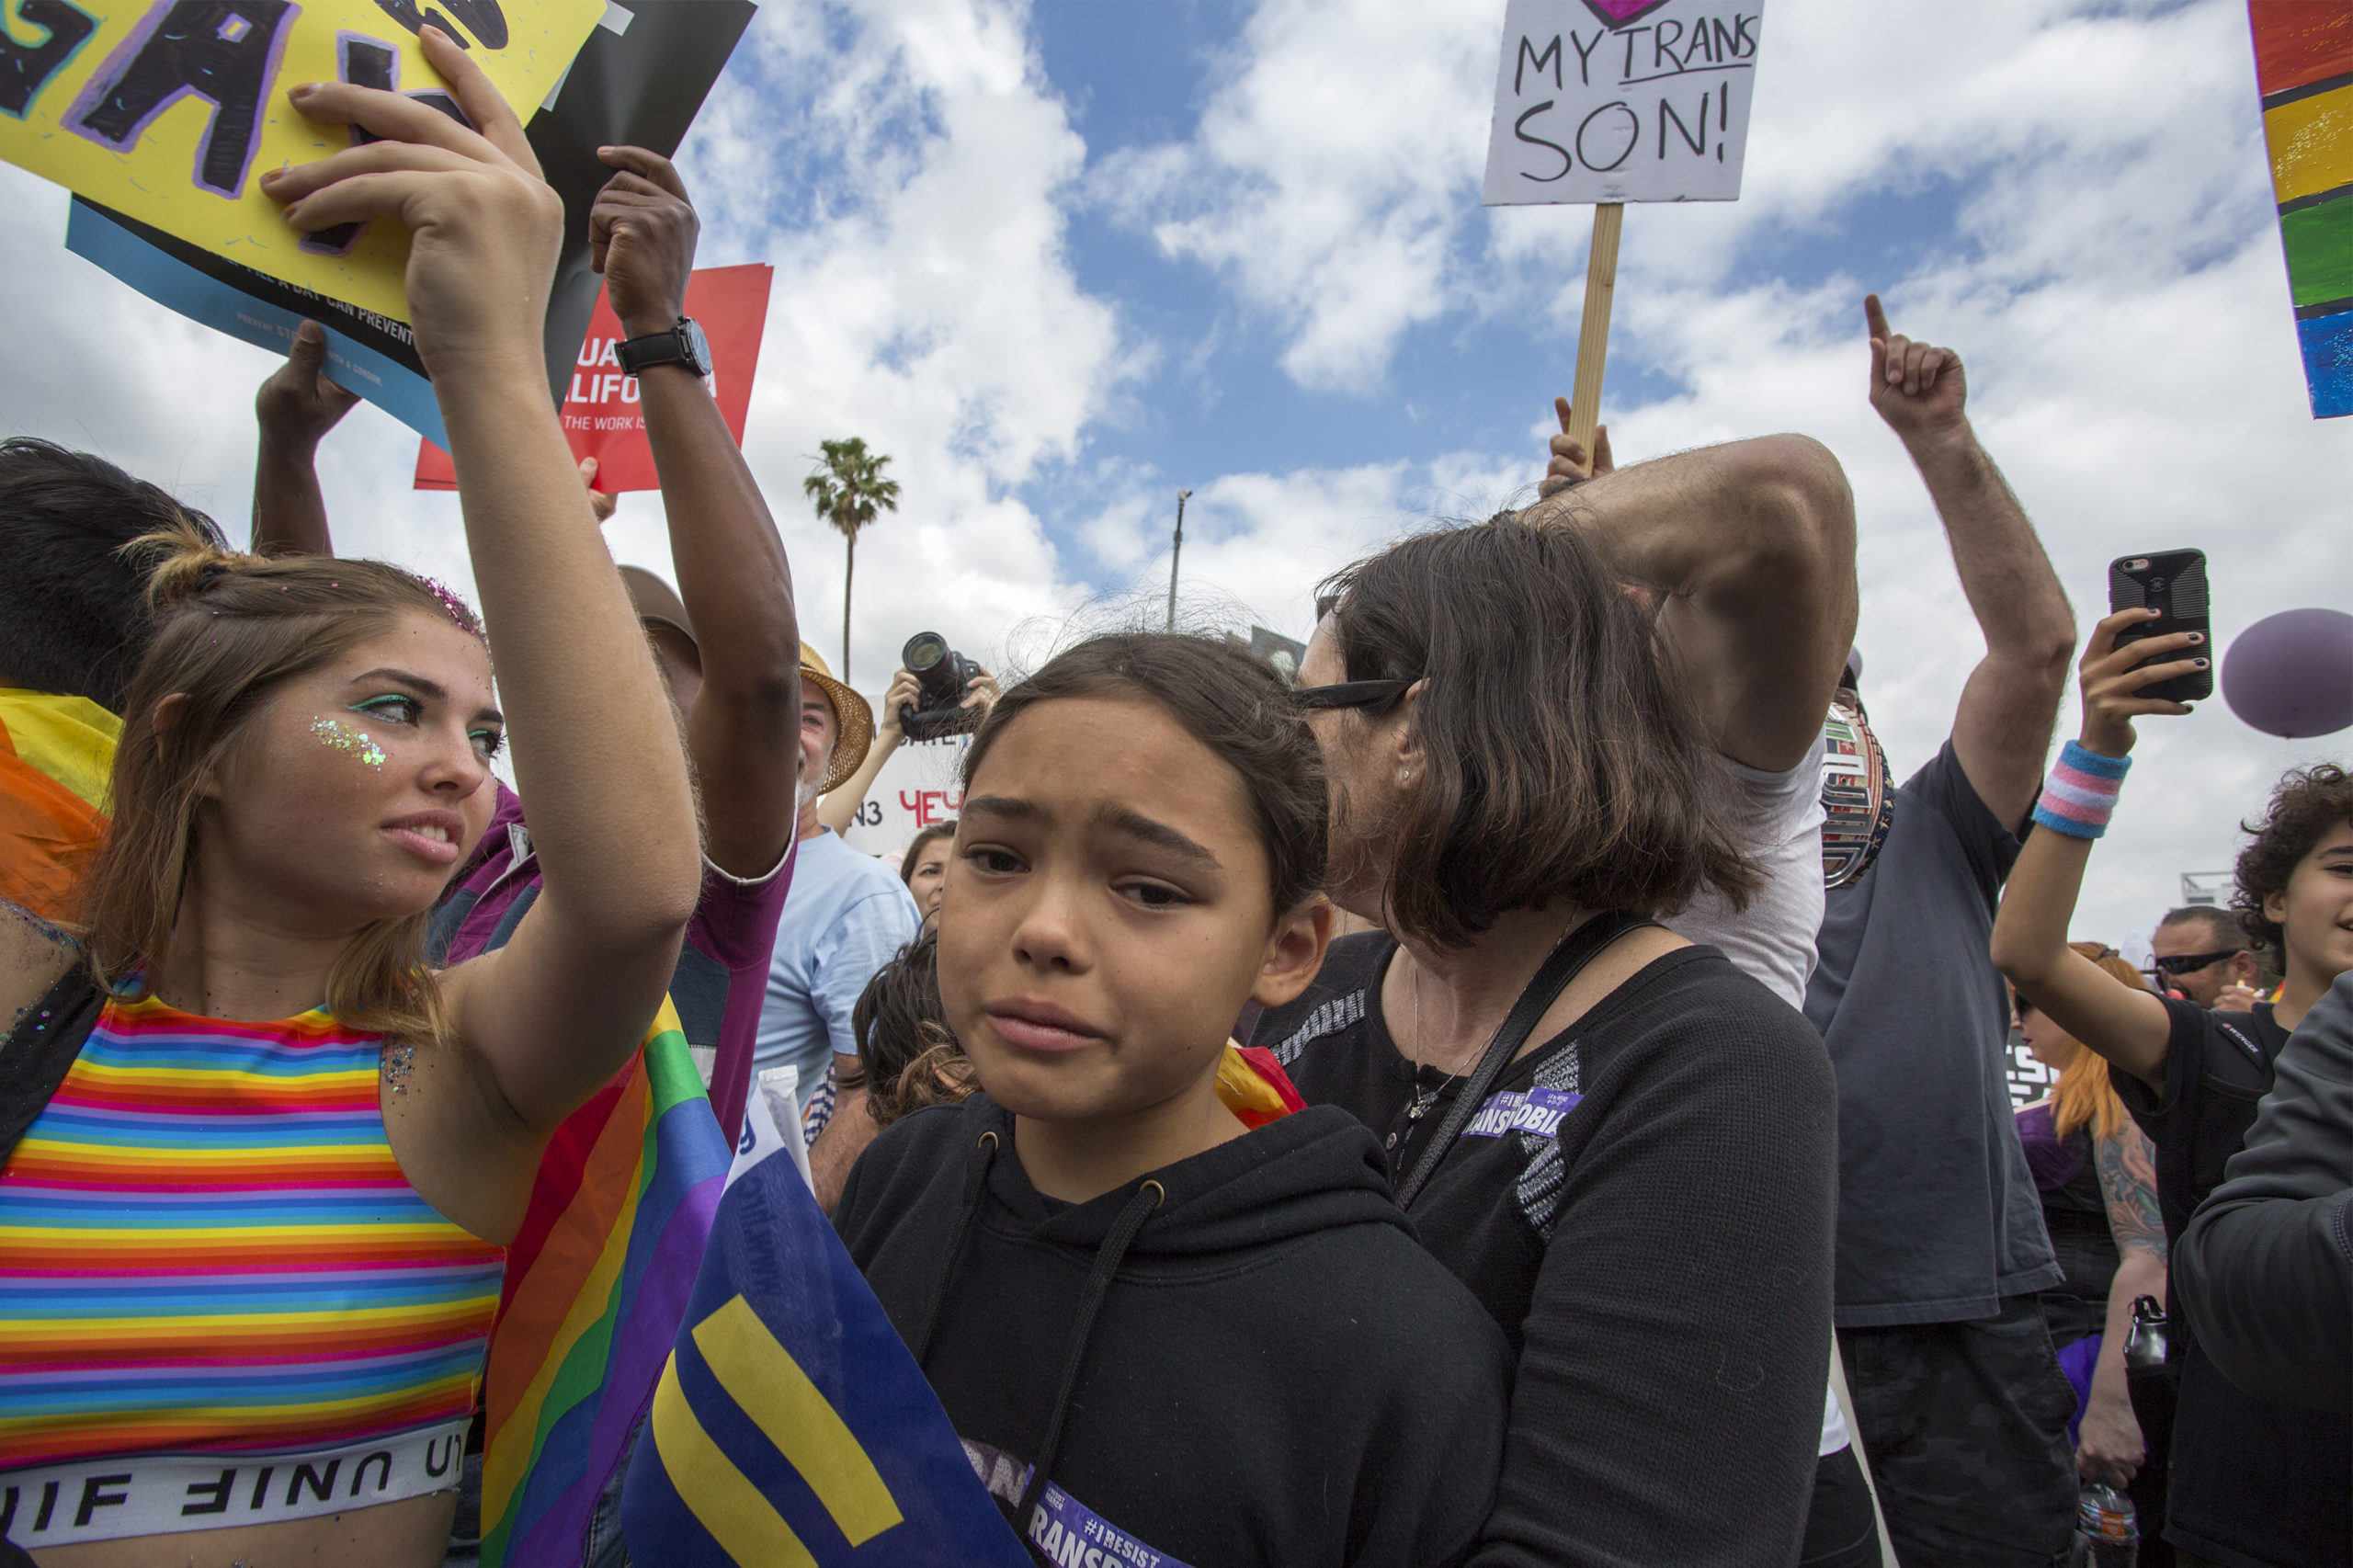 A girl reacts to hateful speech from provocative street preachers at the #ResistMarch during the 47th annual LA Pride Festival on June 11, 2017, in the Hollywood section of Los Angeles and West Hollywood, California. Inspired by the huge womenÕs marches that took place around the world following the inauguration of President Donald Trump and by the early pride demonstrations of the 1970s, LA Pride replaced its decades-old parade with the #ResistMarch protest to promote human rights by marching from Hollywood to West Hollywood. (Photo by David McNew/Getty Images)